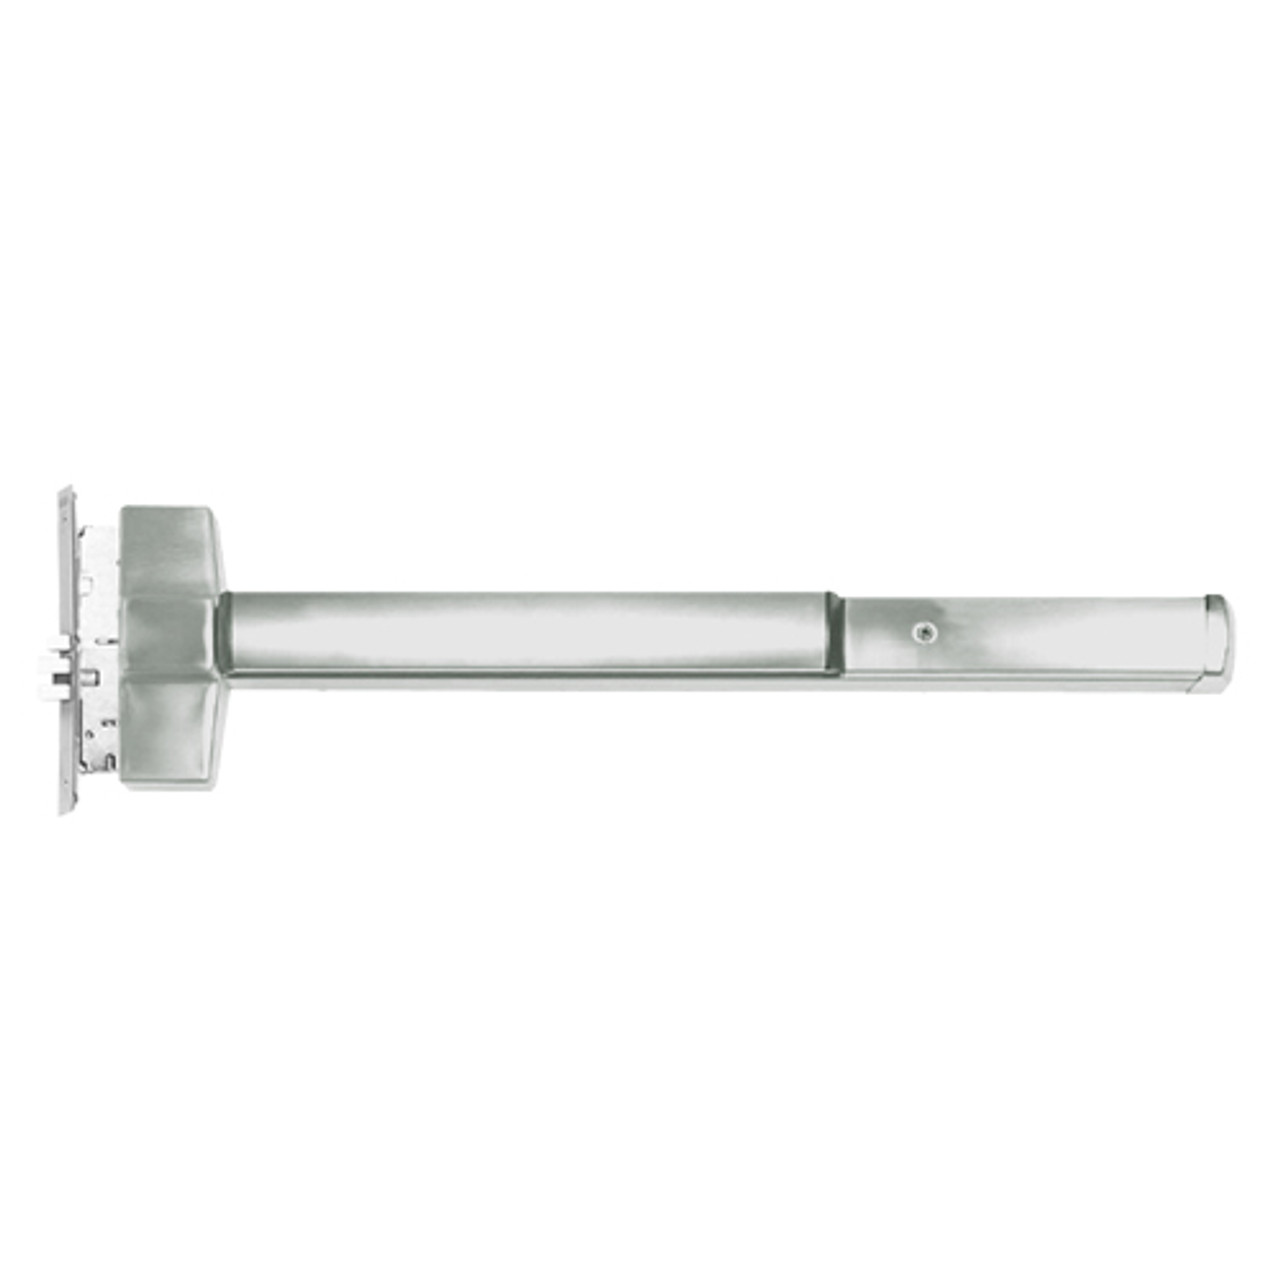 ED5600L-619-W048-RHR Corbin ED5600 Series Non Fire Rated Mortise Exit Device in Satin Nickel Finish